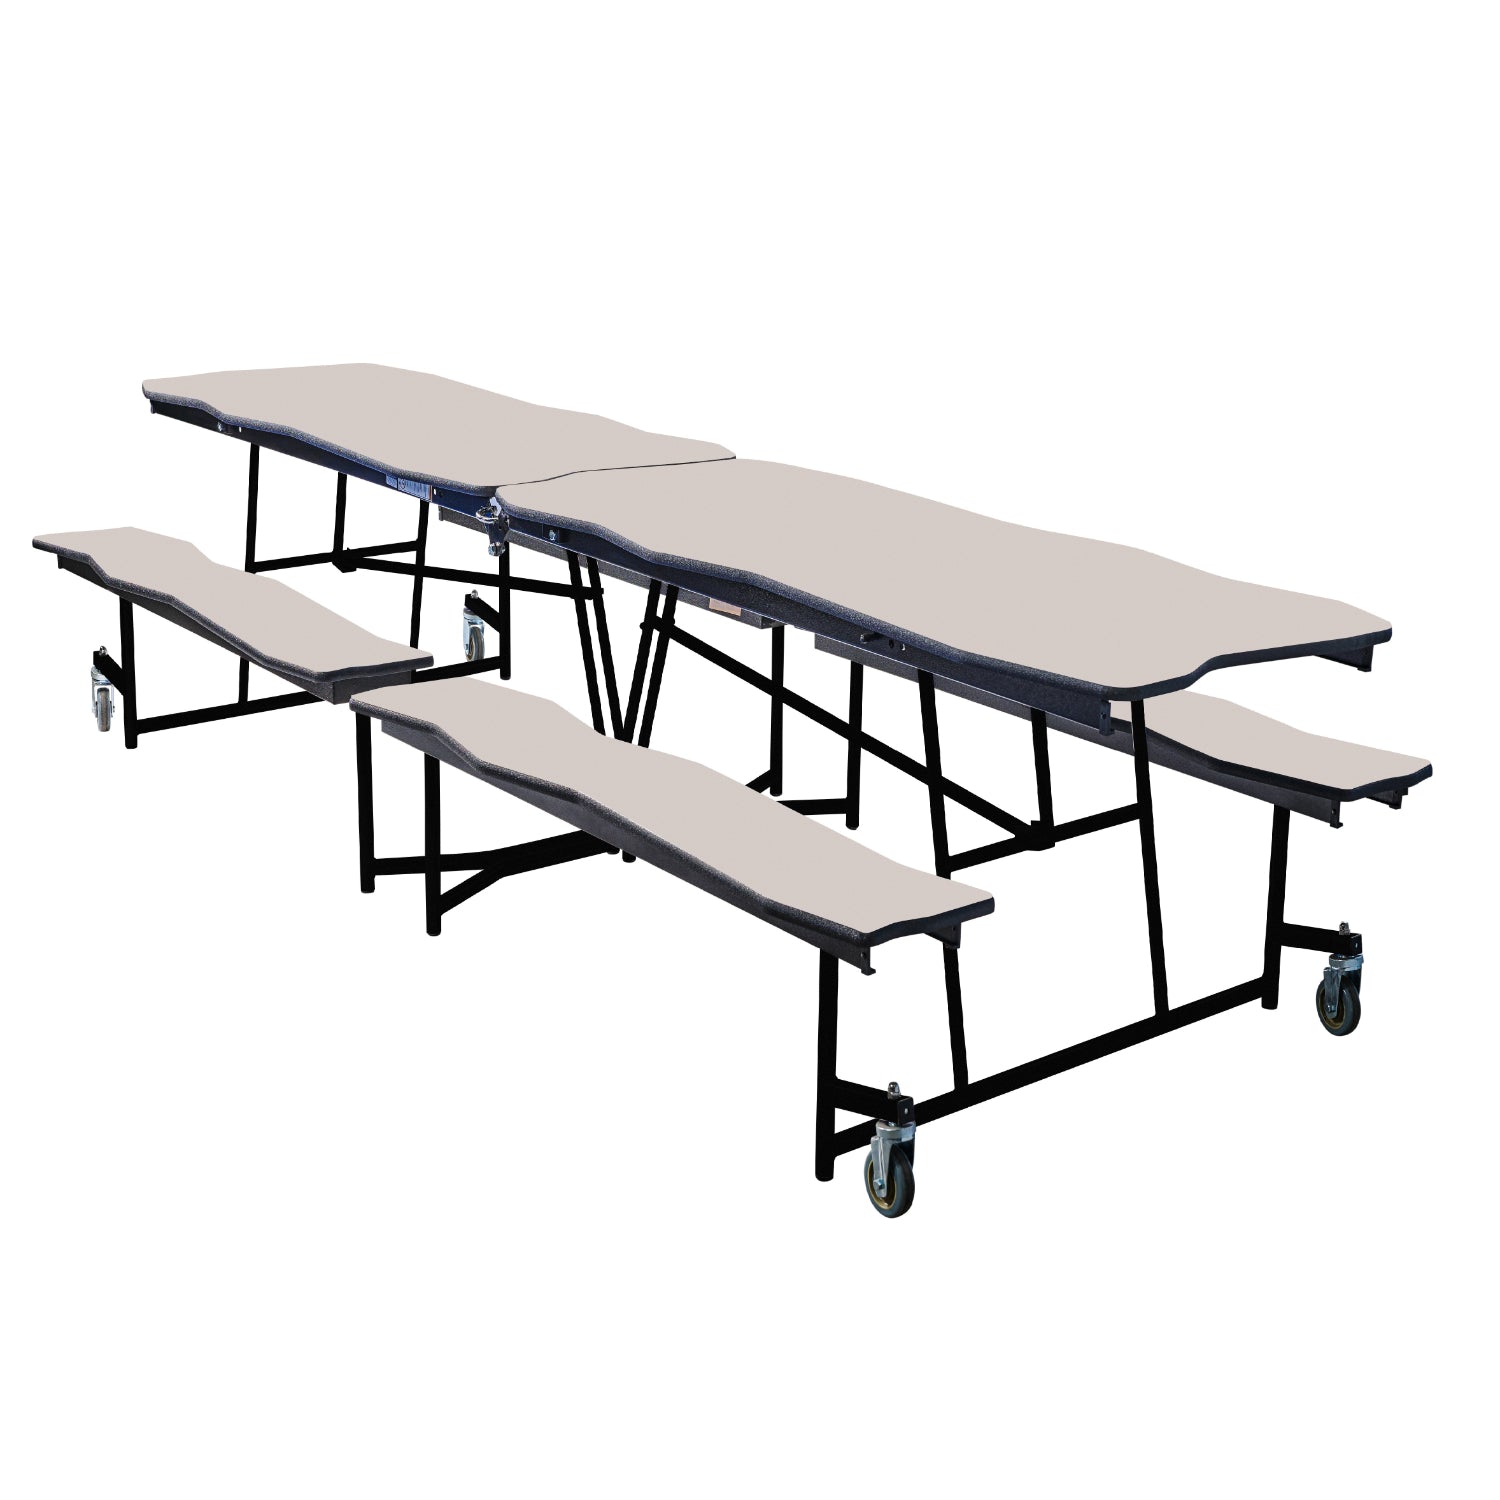 Mobile Cafeteria Table with Benches, 8' Bedrock, Particleboard Core, Vinyl T-Mold Edge, Textured Black Frame